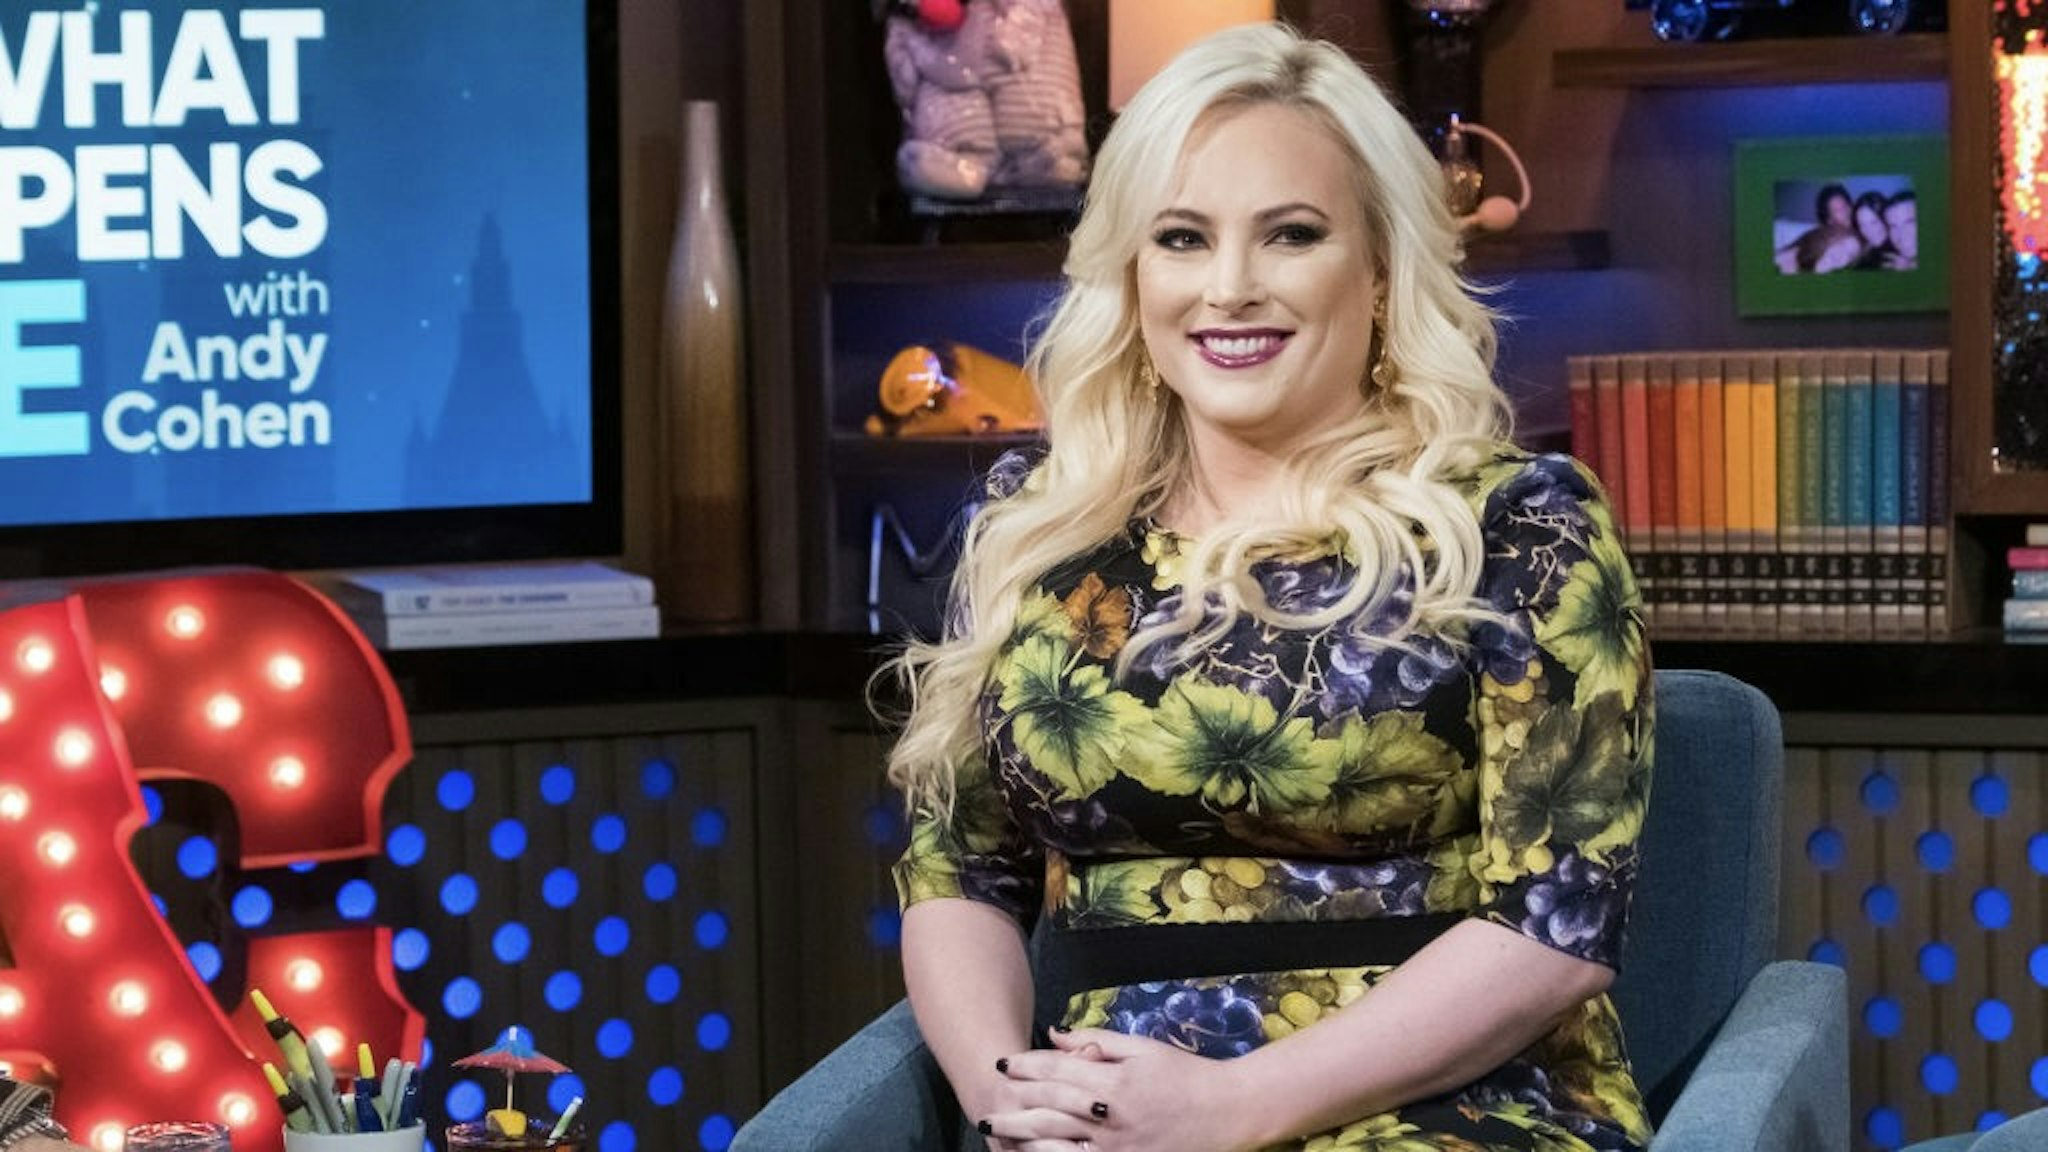 Watch What Happens Live With Andy Cohen - Season 16 WATCH WHAT HAPPENS LIVE WITH ANDY COHEN -- Pictured: Meghan McCain -- (Photo by: Charles Sykes/Bravo/NBCU Photo Bank/NBCUniversal via Getty Images) Bravo / Contributor via Getty Images